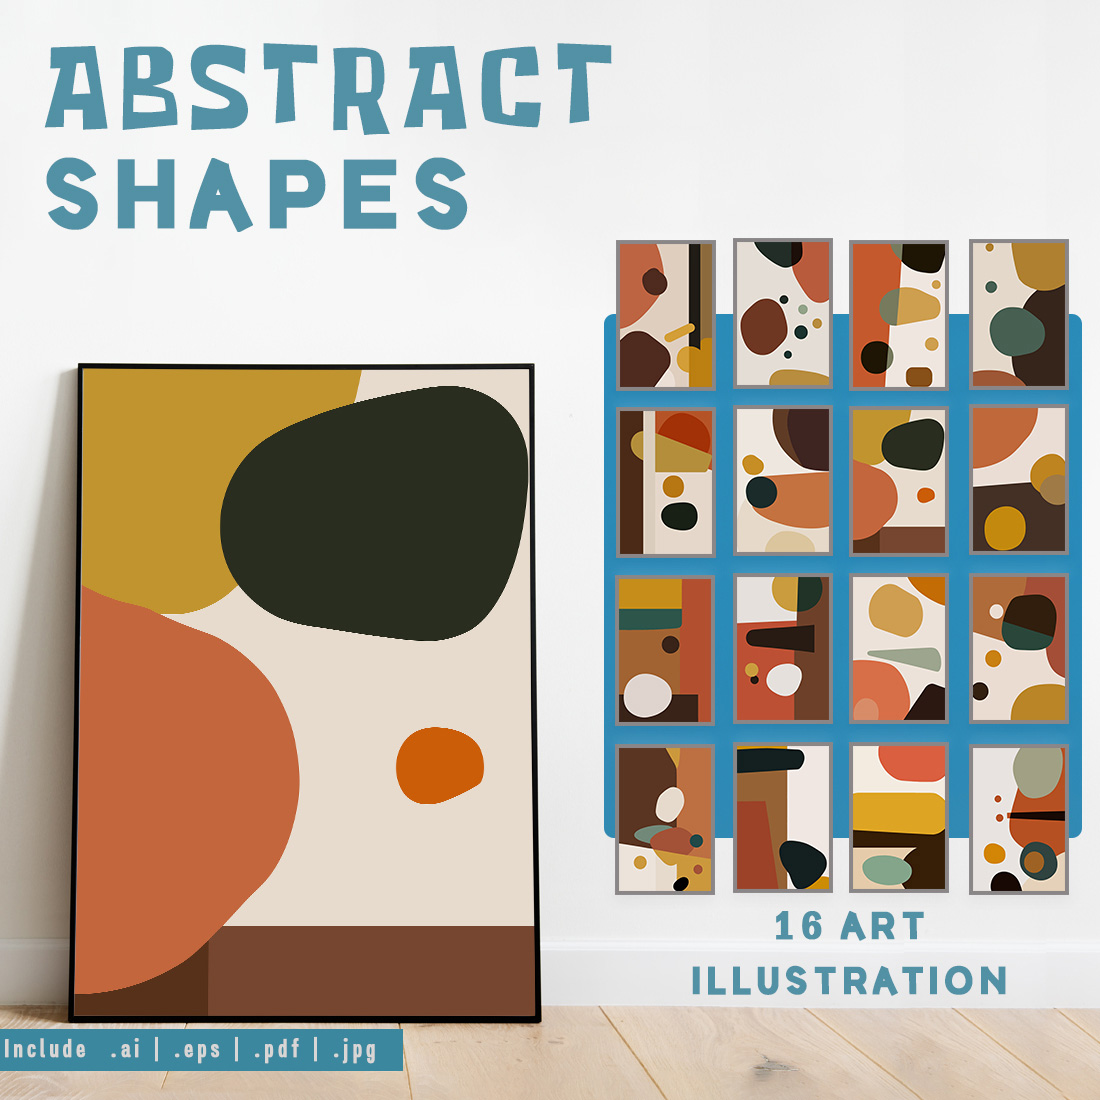 Abstract Shape Modern Art Print cover image.